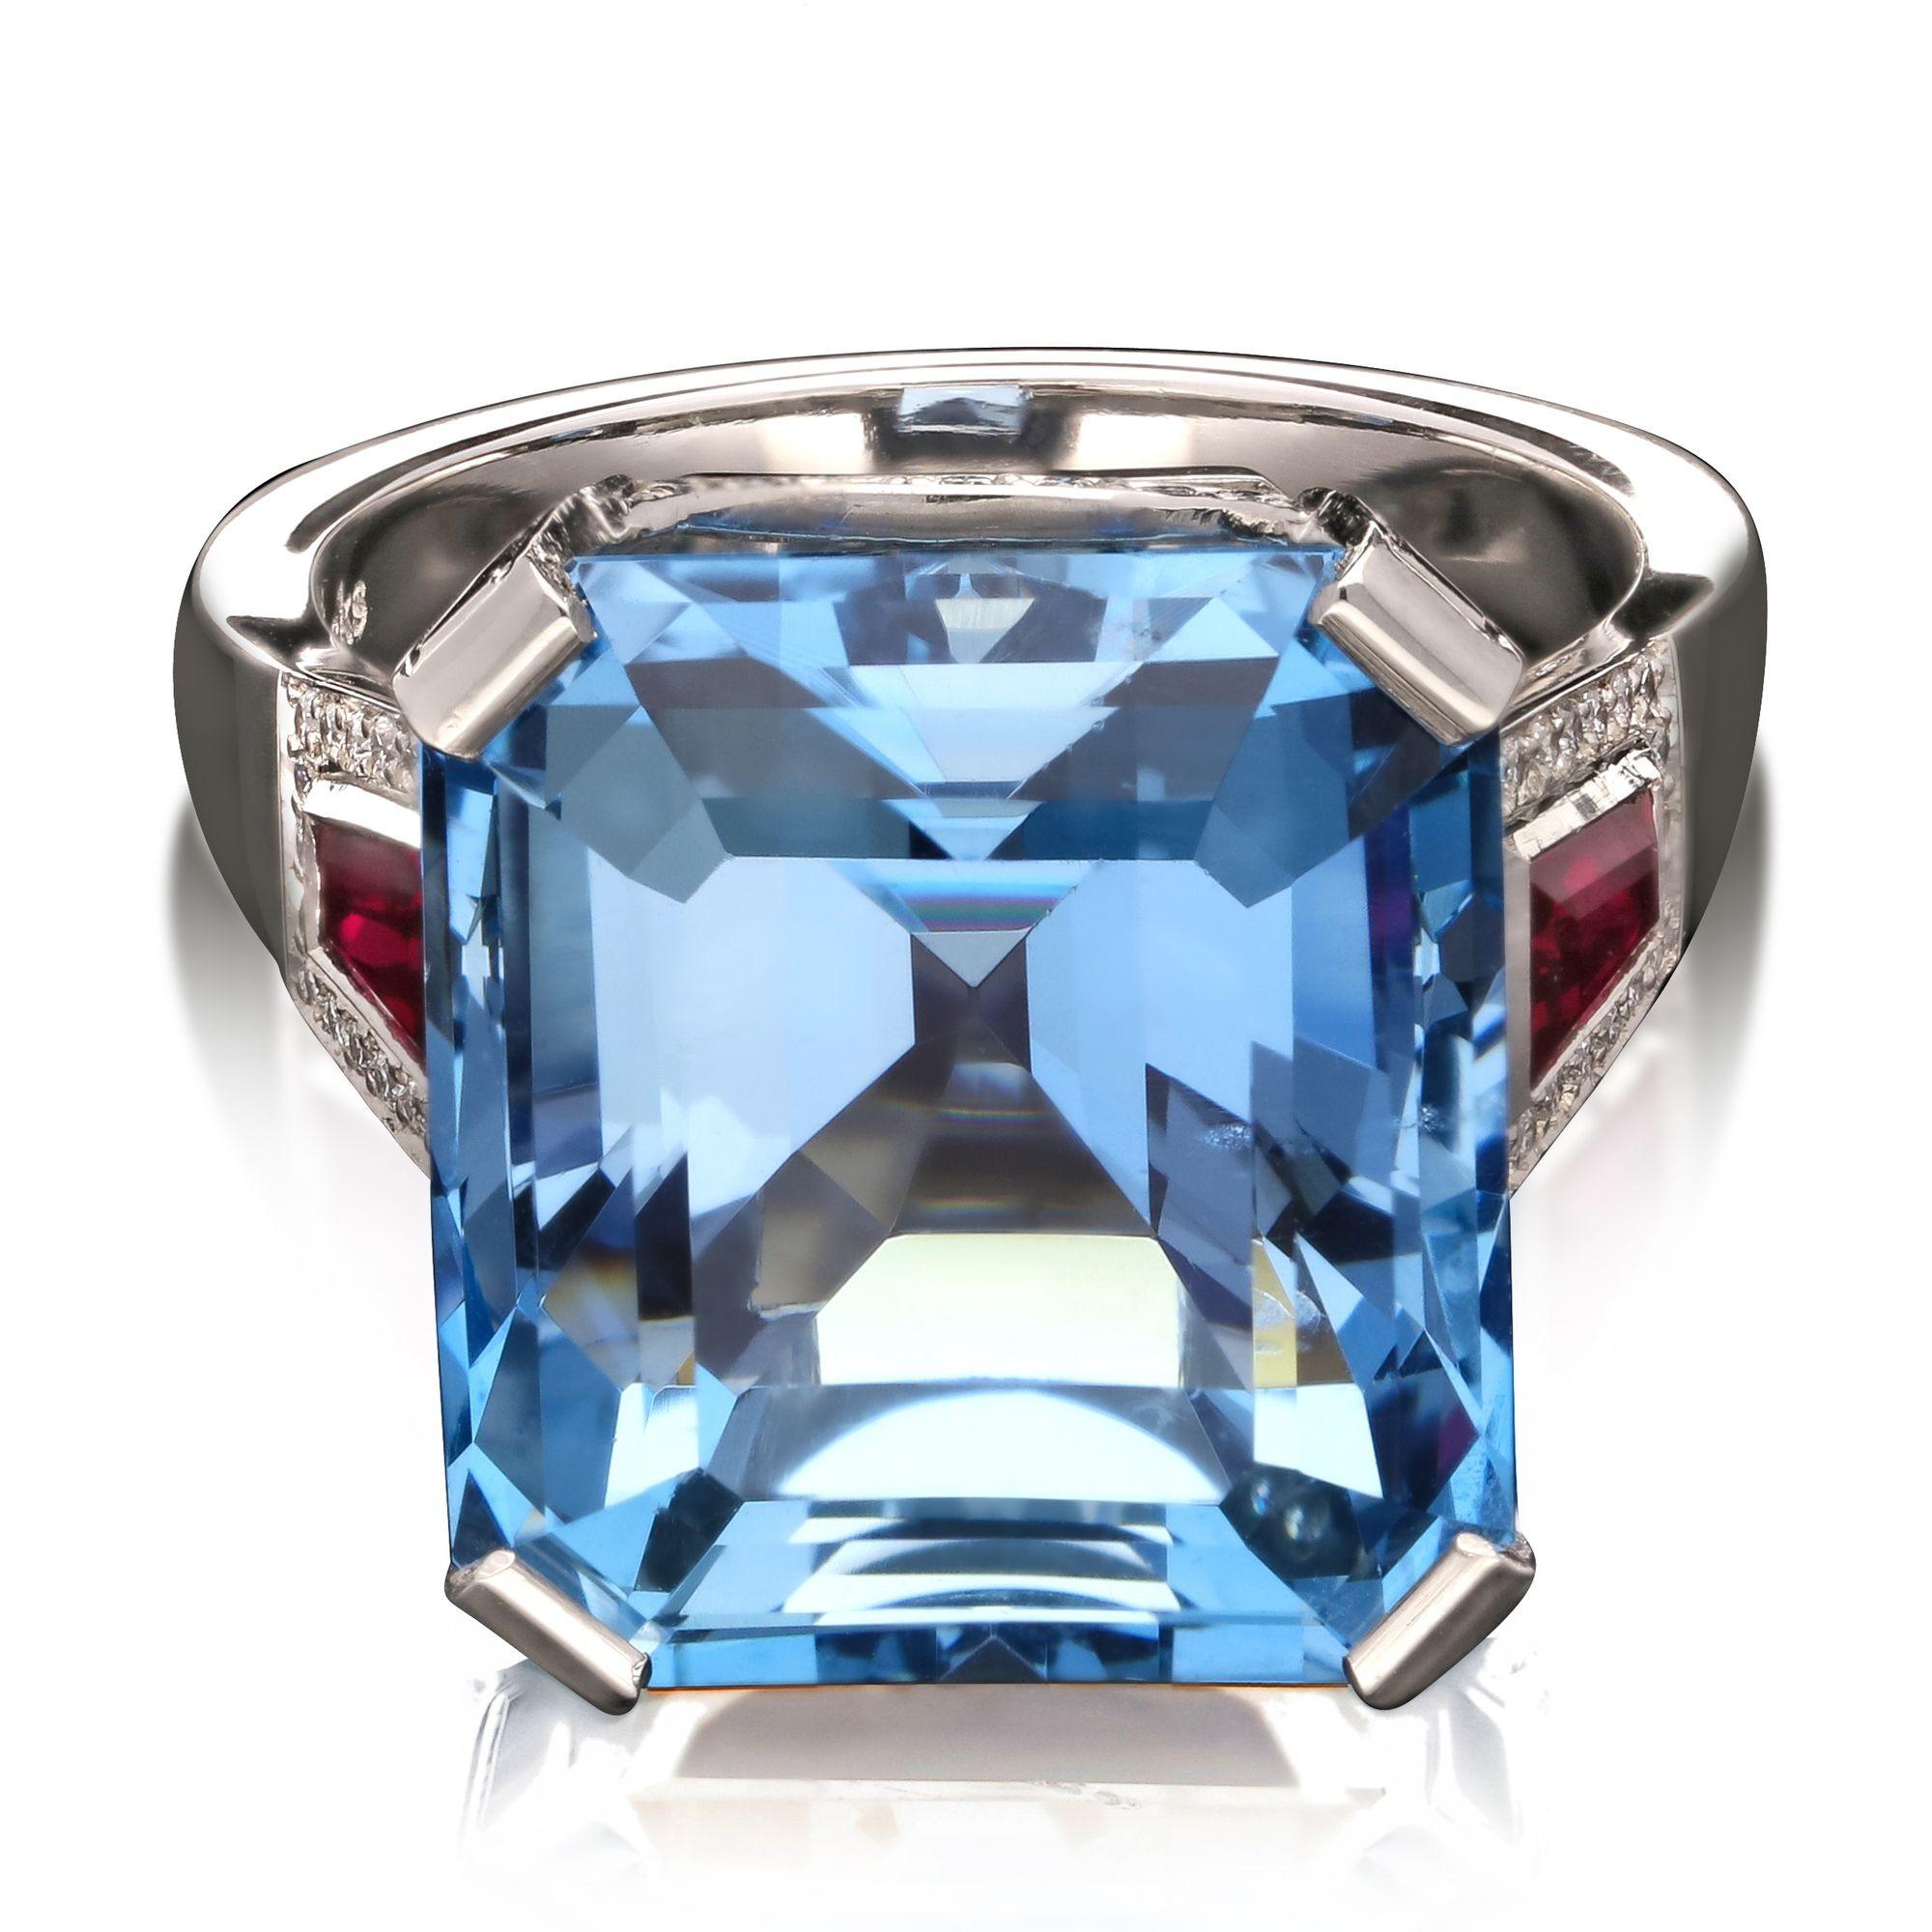 An aquamarine cocktail ring by Hancocks, centred with a beautiful emerald-cut aquamarine weighing 14.17cts corner-claw set in platinum, the scooped gallery embellished with round brilliant diamonds and each shoulder set with a tapered baguette ruby